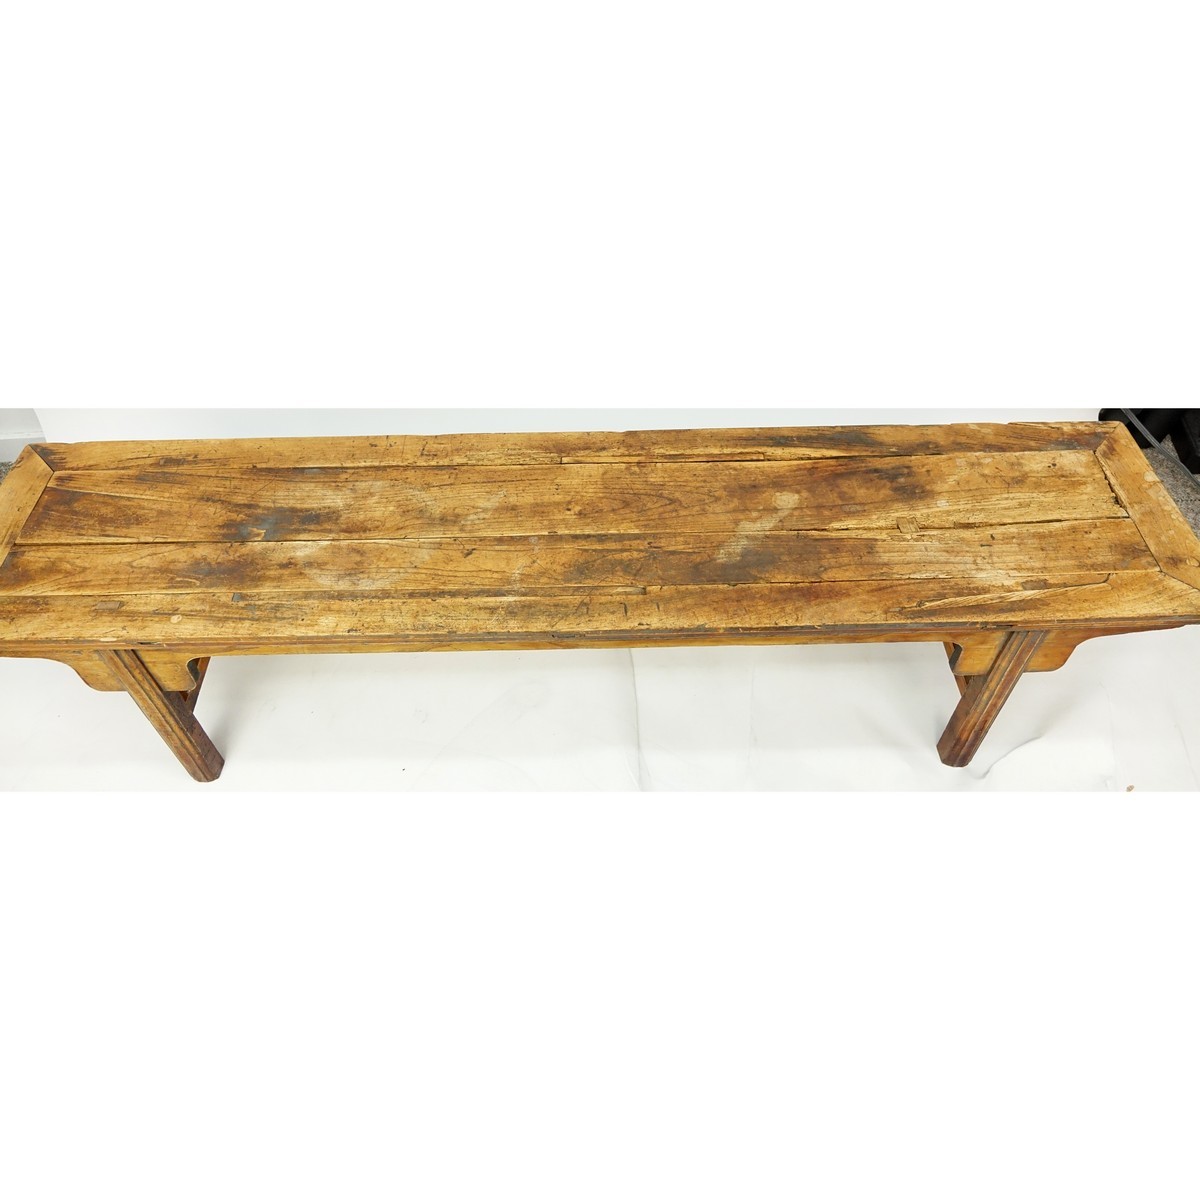 Large 19/20th Century Chinese Hardwood Bench. Wear to wood, scratches and scuffs to legs. Measures 